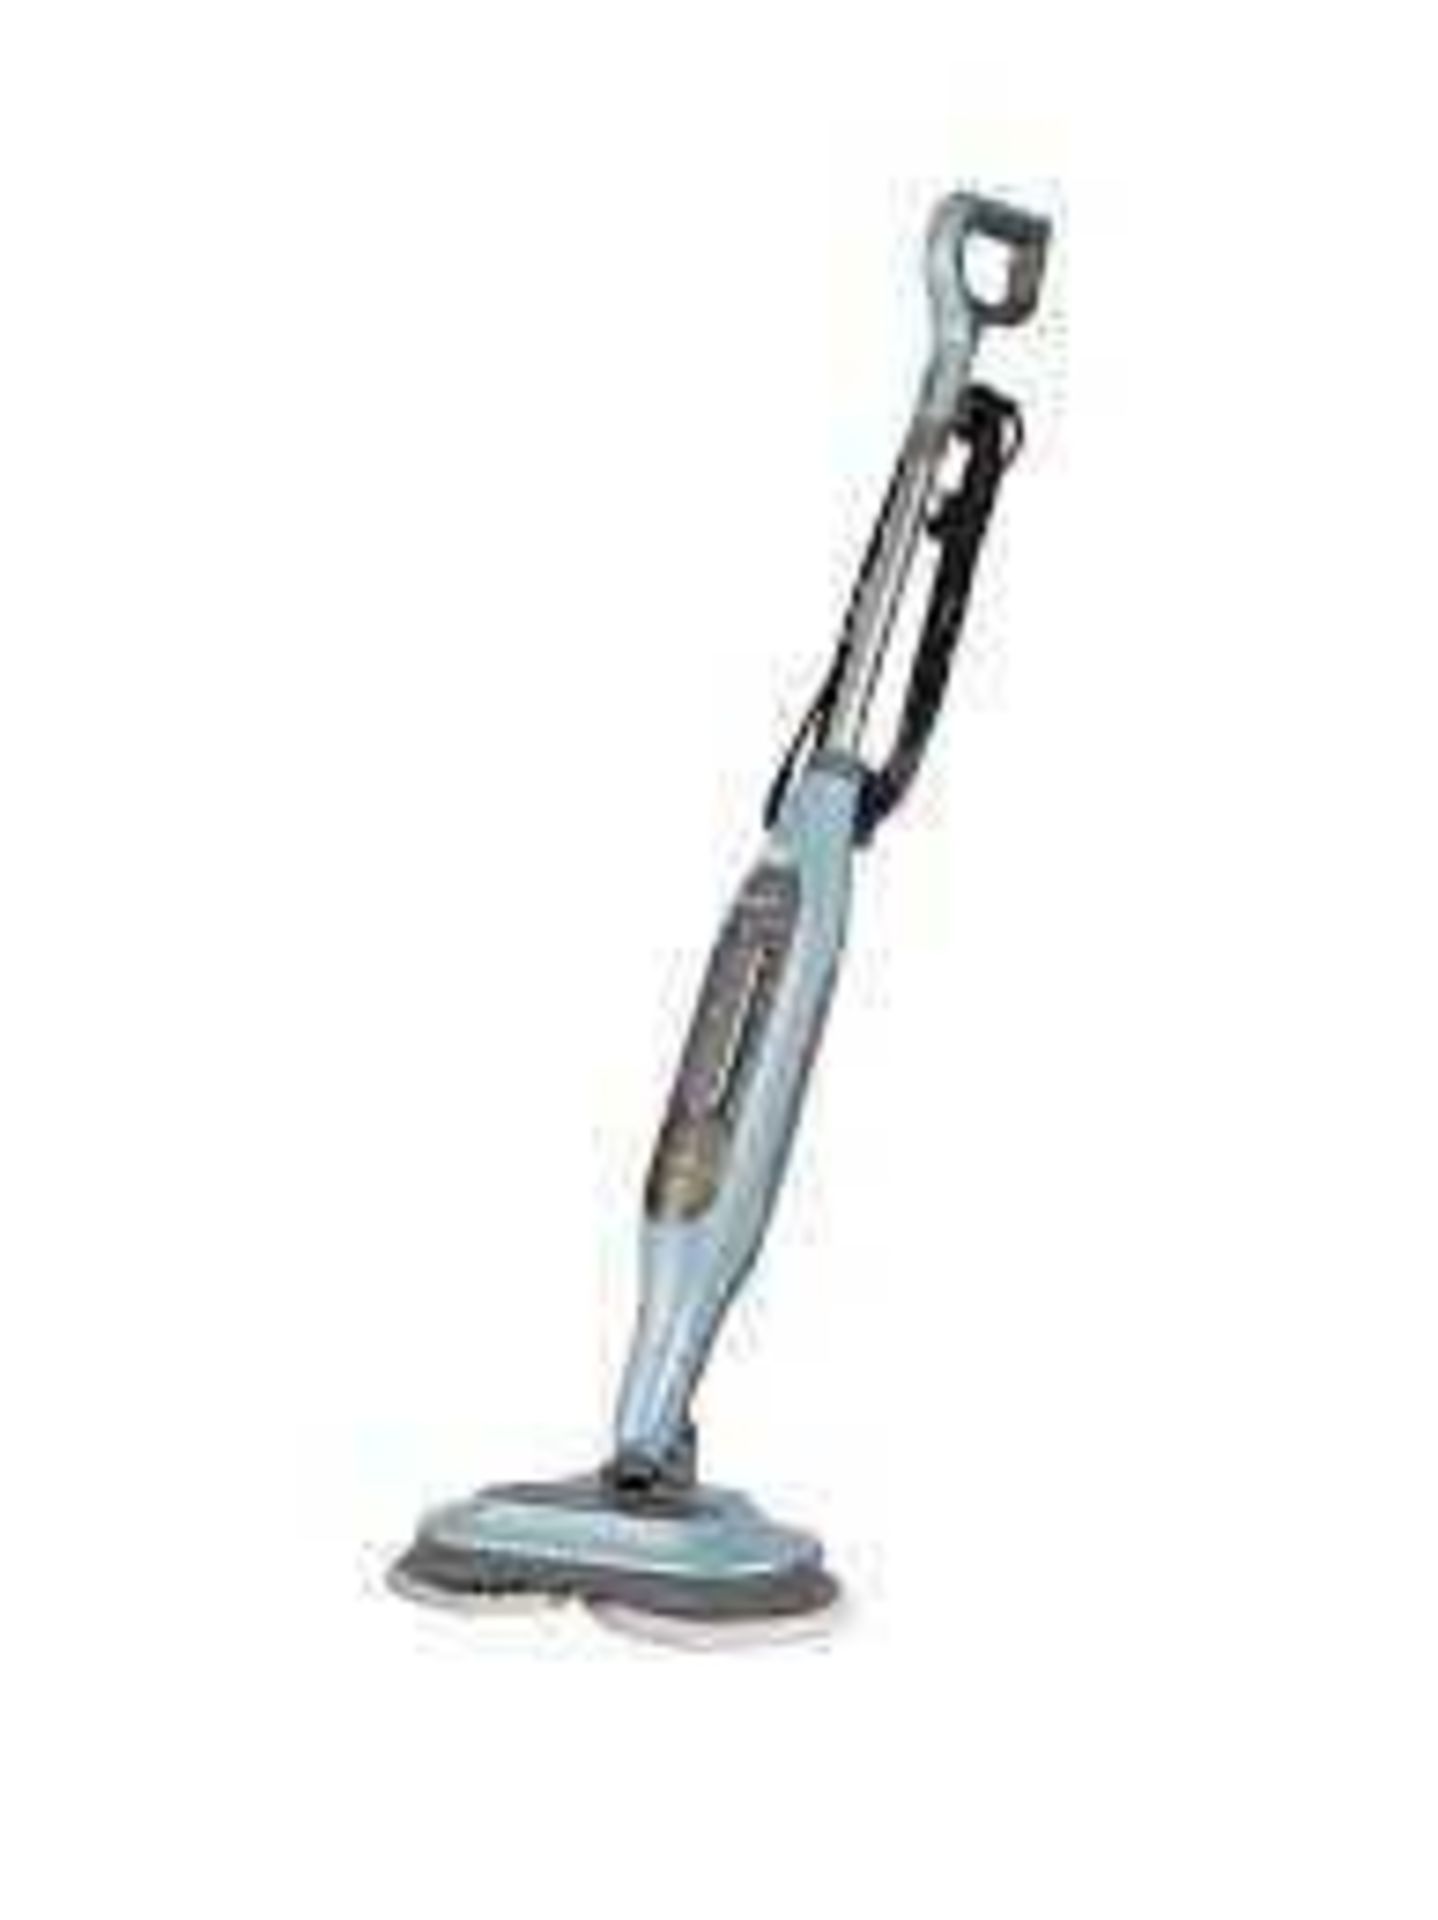 RRP £200, Shark Steam Mop, Silver/Grey, Boxed (Used) (T)